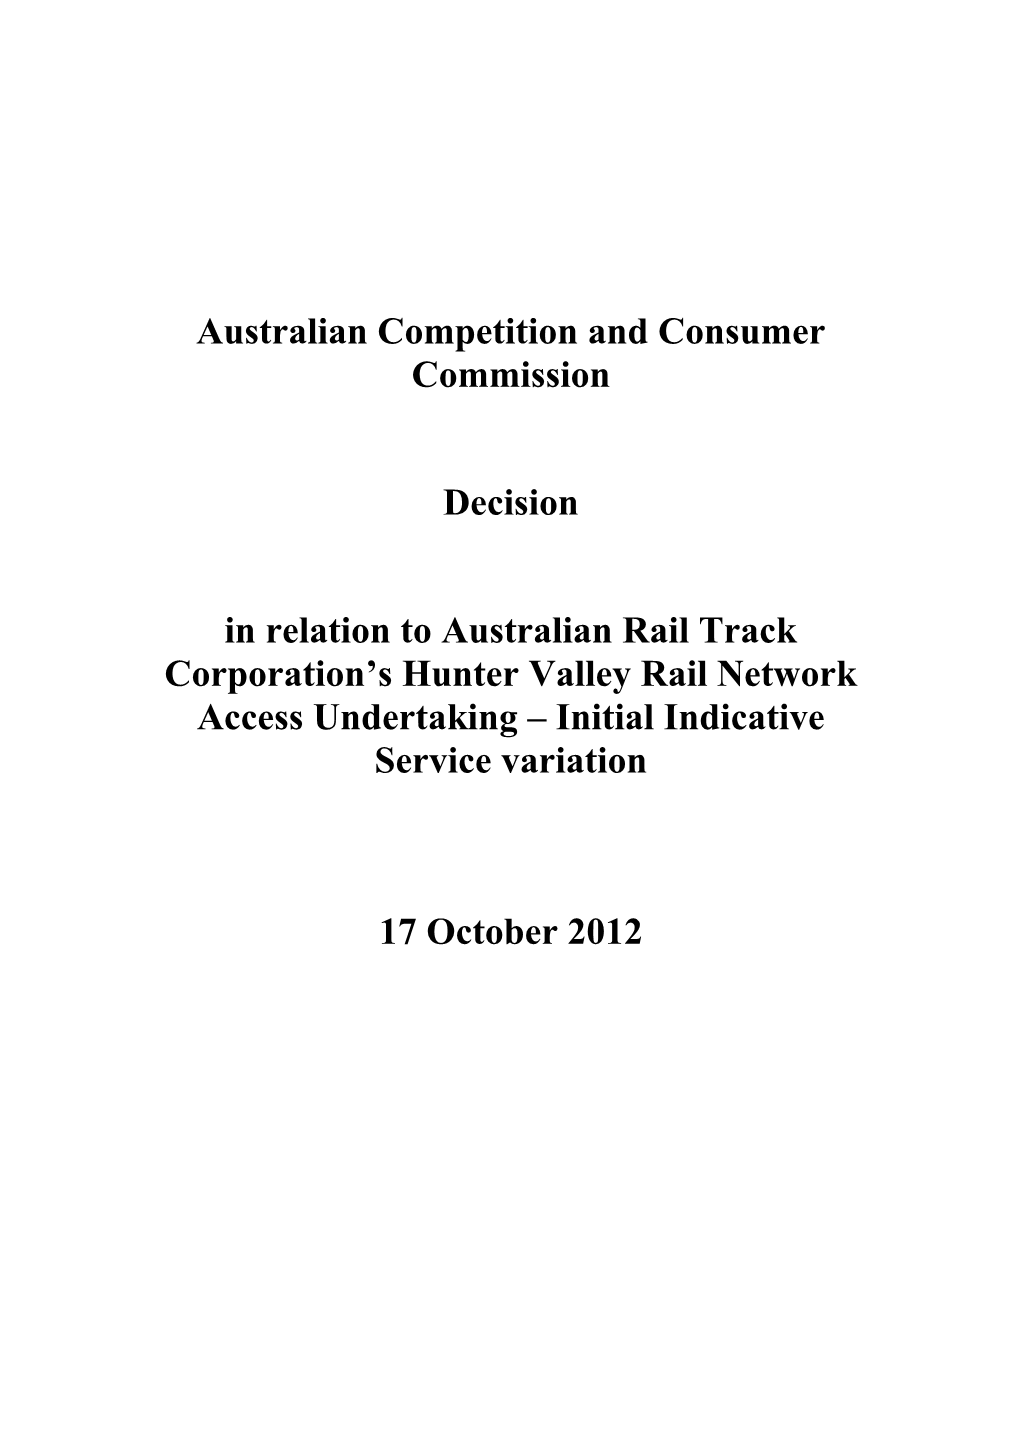 Australian Competition and Consumer Commission s1